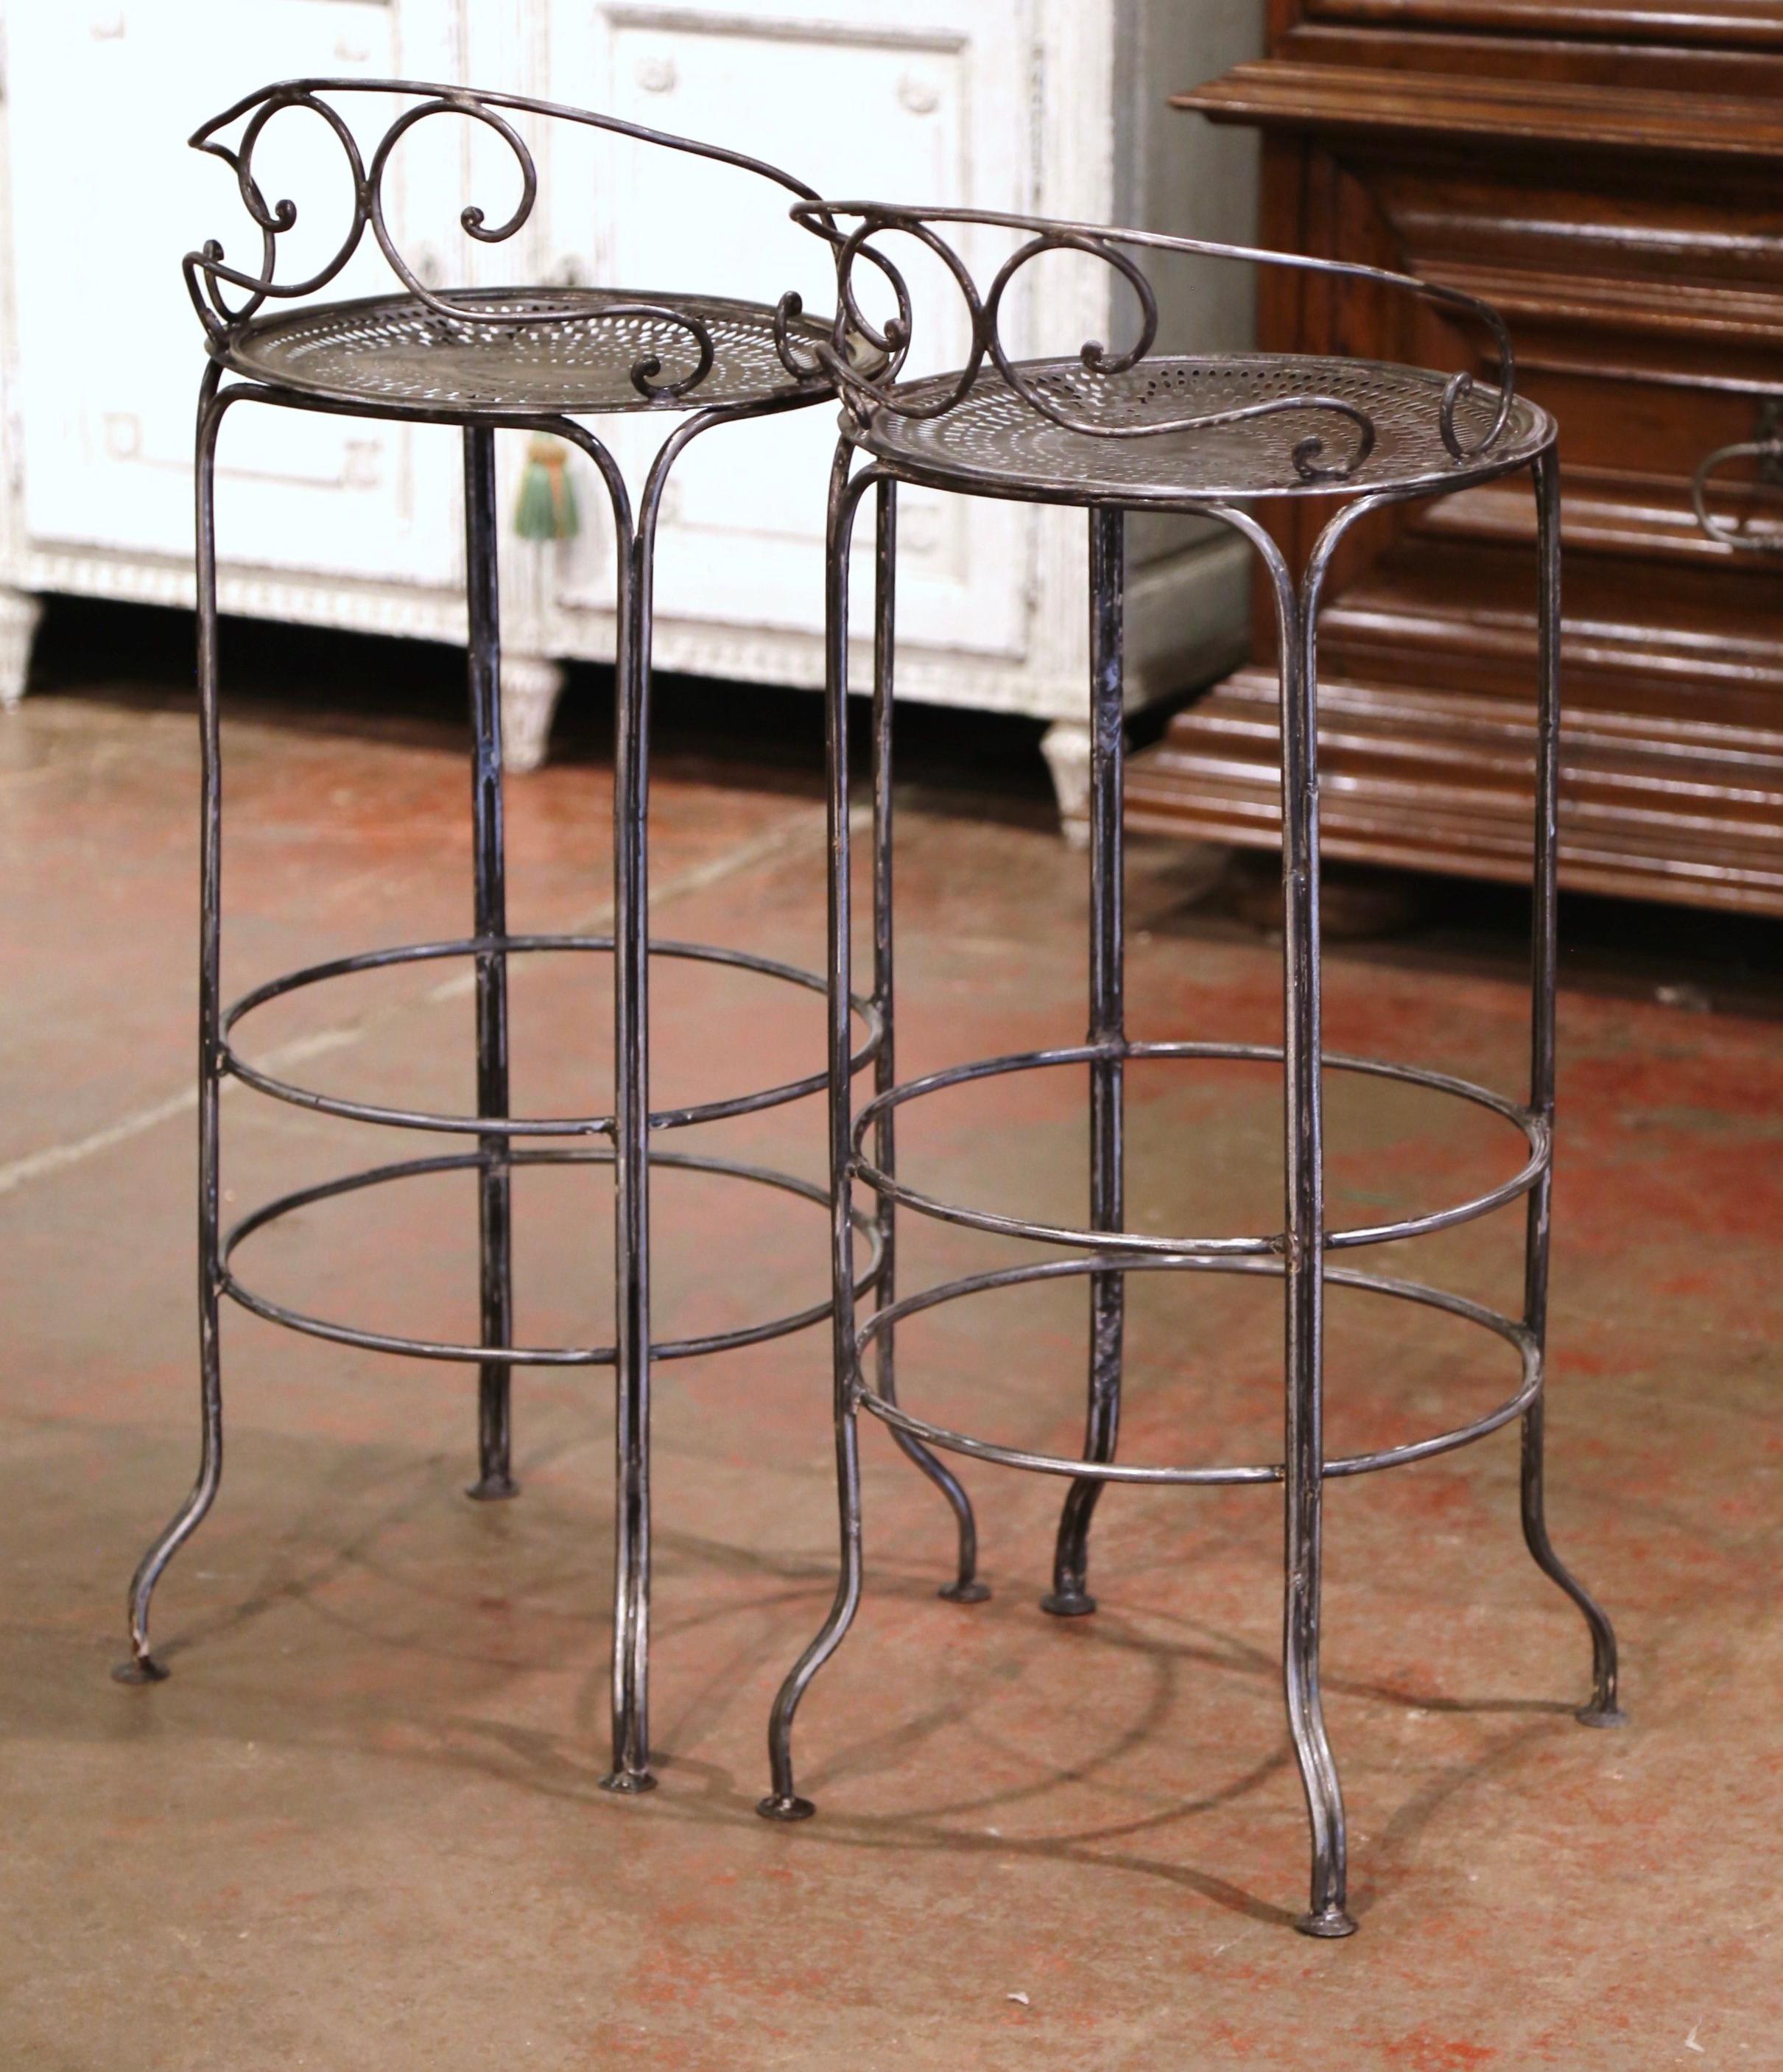 Pair of 19th Century French Polished Wrought Iron Outdoor Garden Bar Stools 7